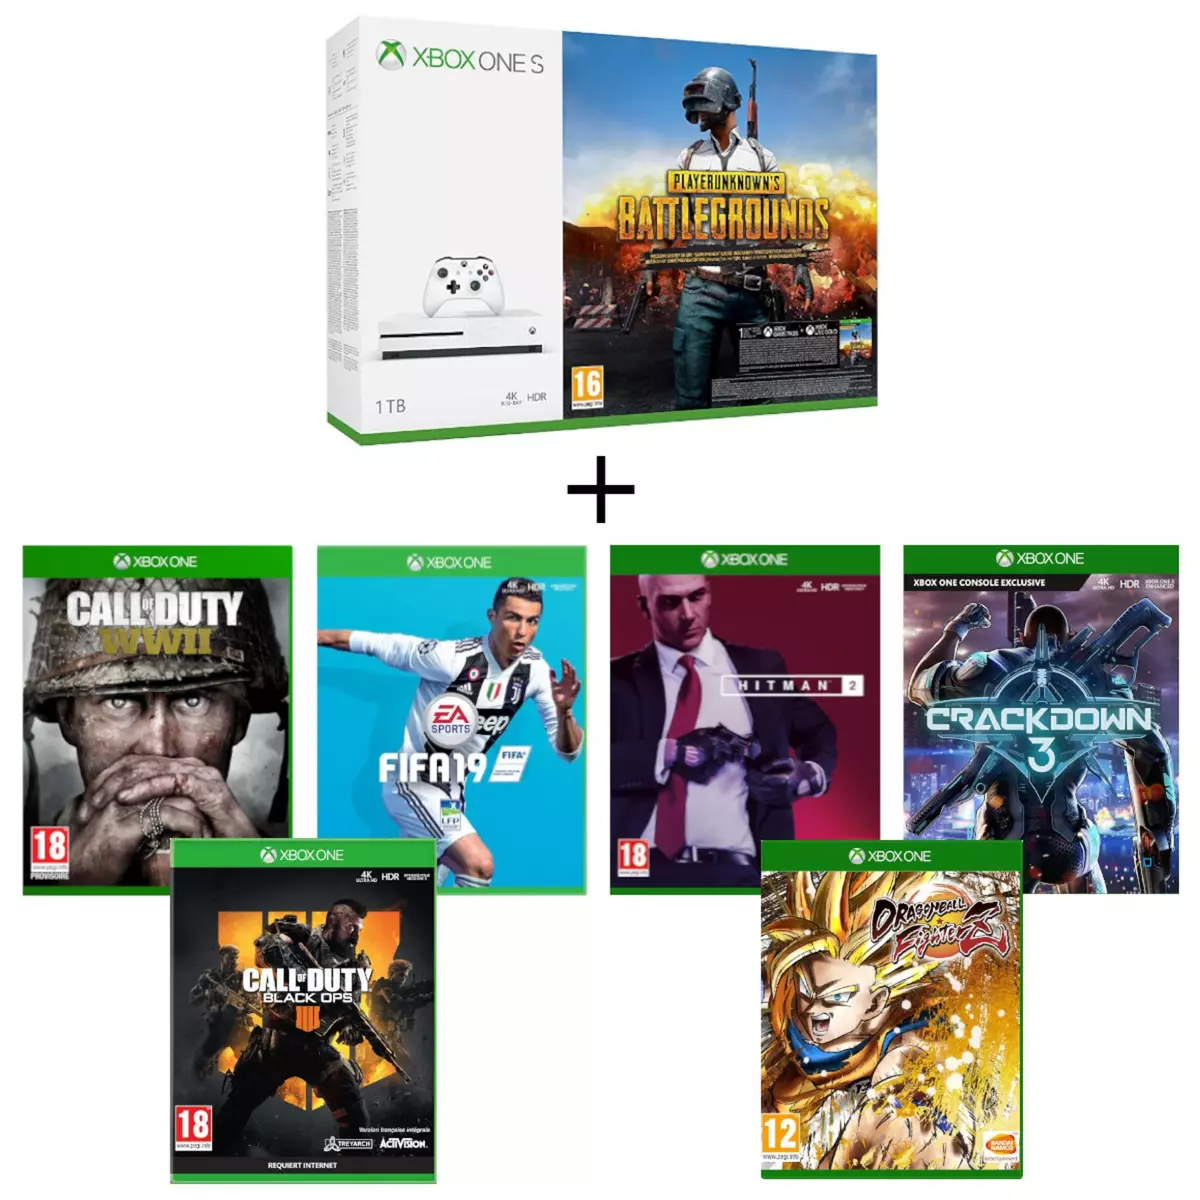 MICROSOFT Console Xbox One S 1To PUBG + Dragon Ball FighterZ + Call of Duty WWII + Fifa 19 + Crackdown 3 + Call of Duty Black Ops 4 + Hitman 2